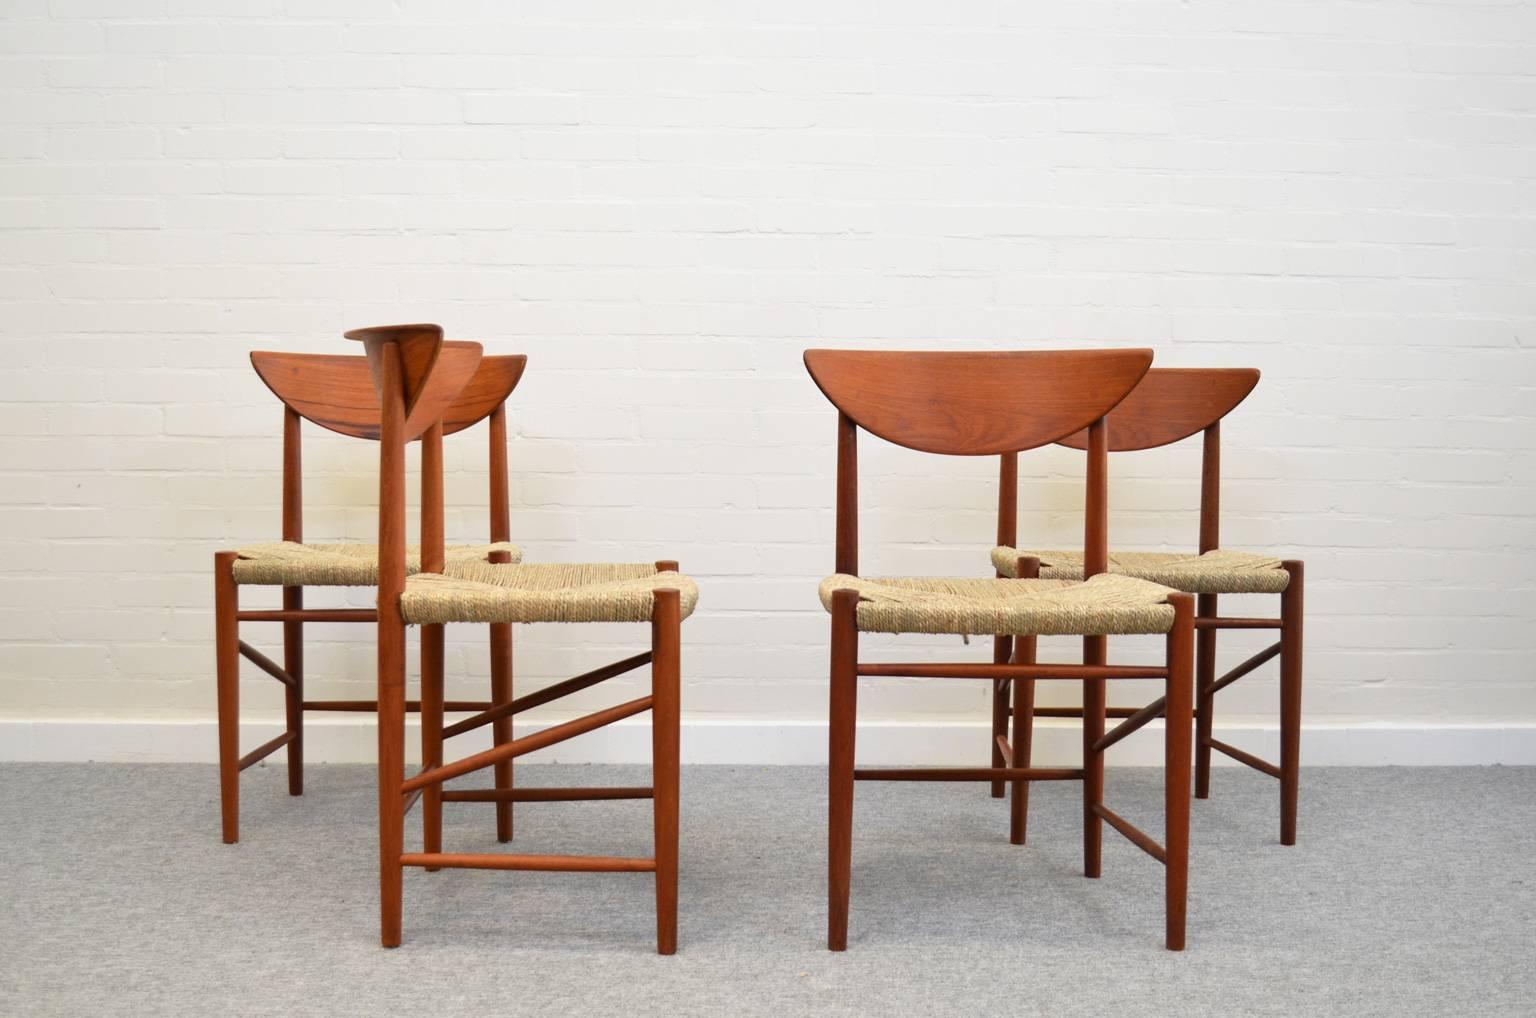 Unique mid-century Danish dining chairs. The shape of the backrest, the crosspieces between the legs and the combination of teak and seagrass is typical for the craftsmanship of this Danish designers duo Hvidt & Mølgaard-NIlesen. 